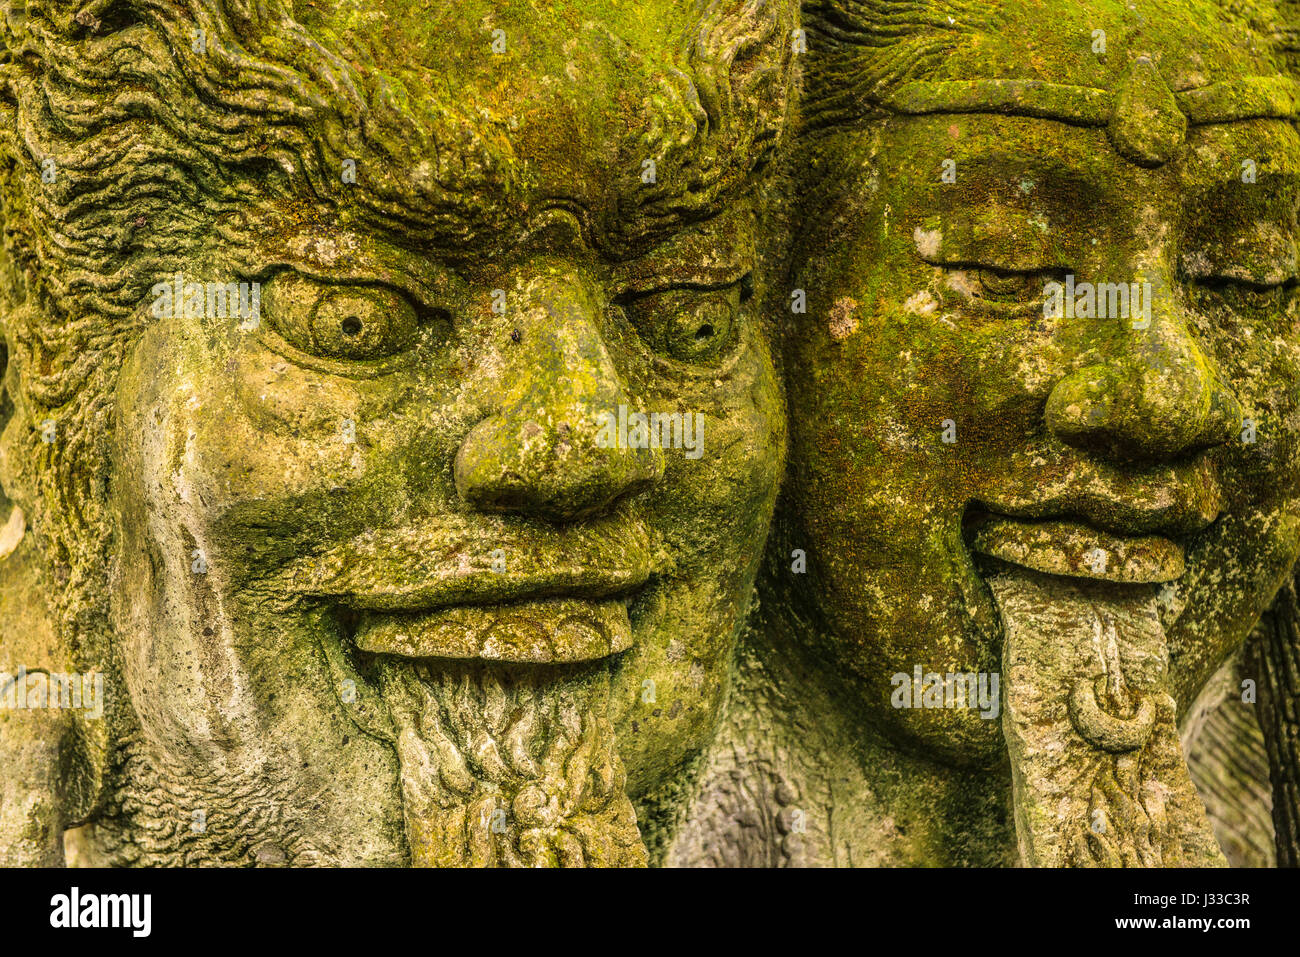 Close up of stone Balinese Temple statues, Ubut, Bali, Indonesia Stock Photo